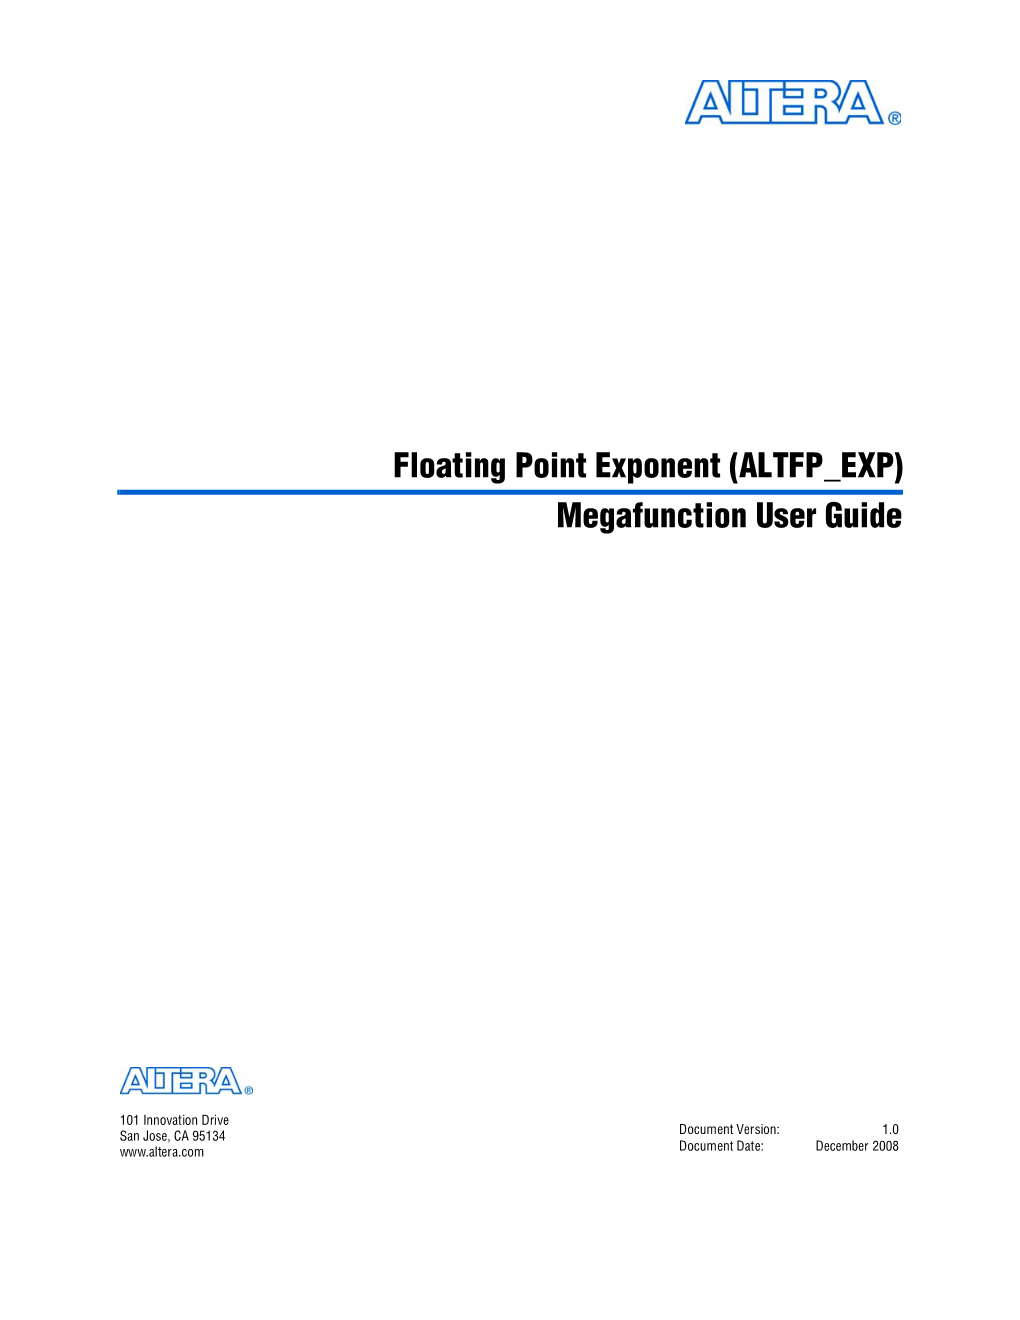 Floating Point Exponent (ALTFP EXP) Megafunction User Guide